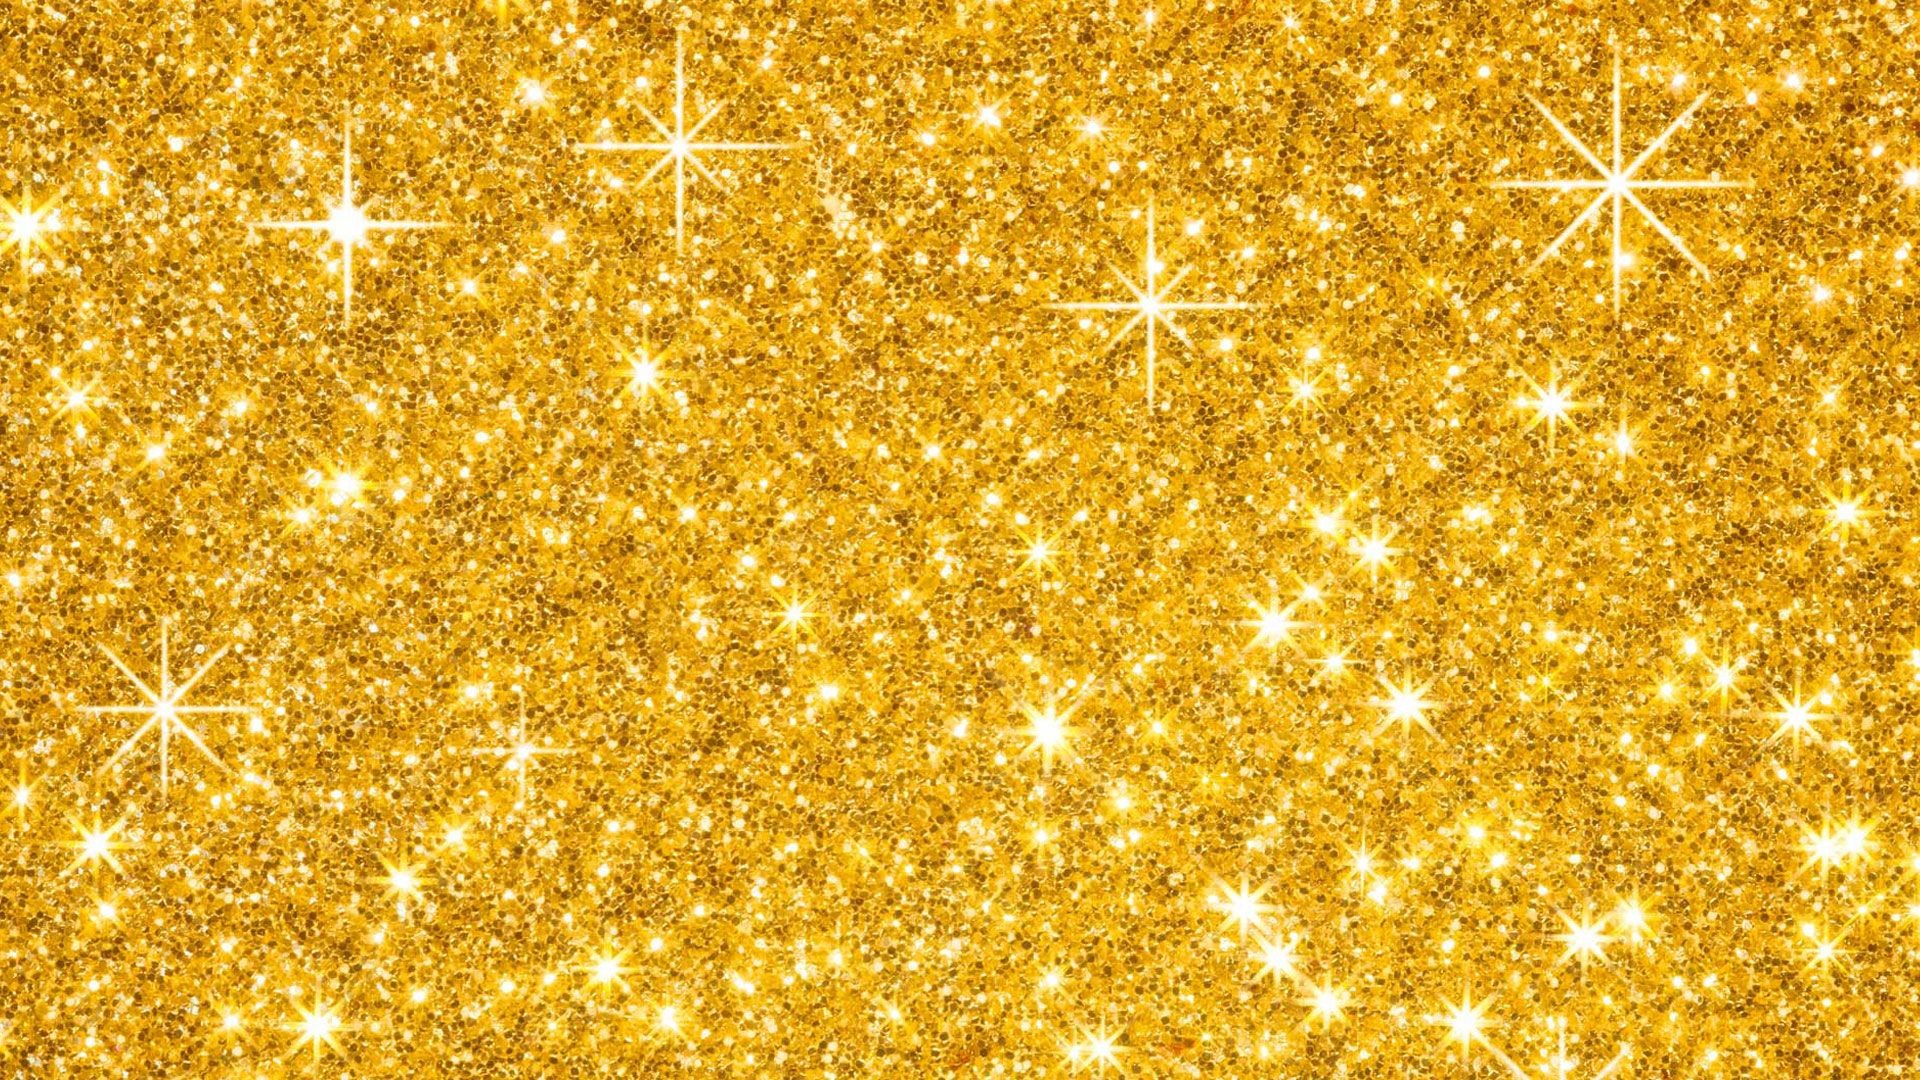 1920x1080 Free Download Gold Glitter 1080p Background Properties #7719